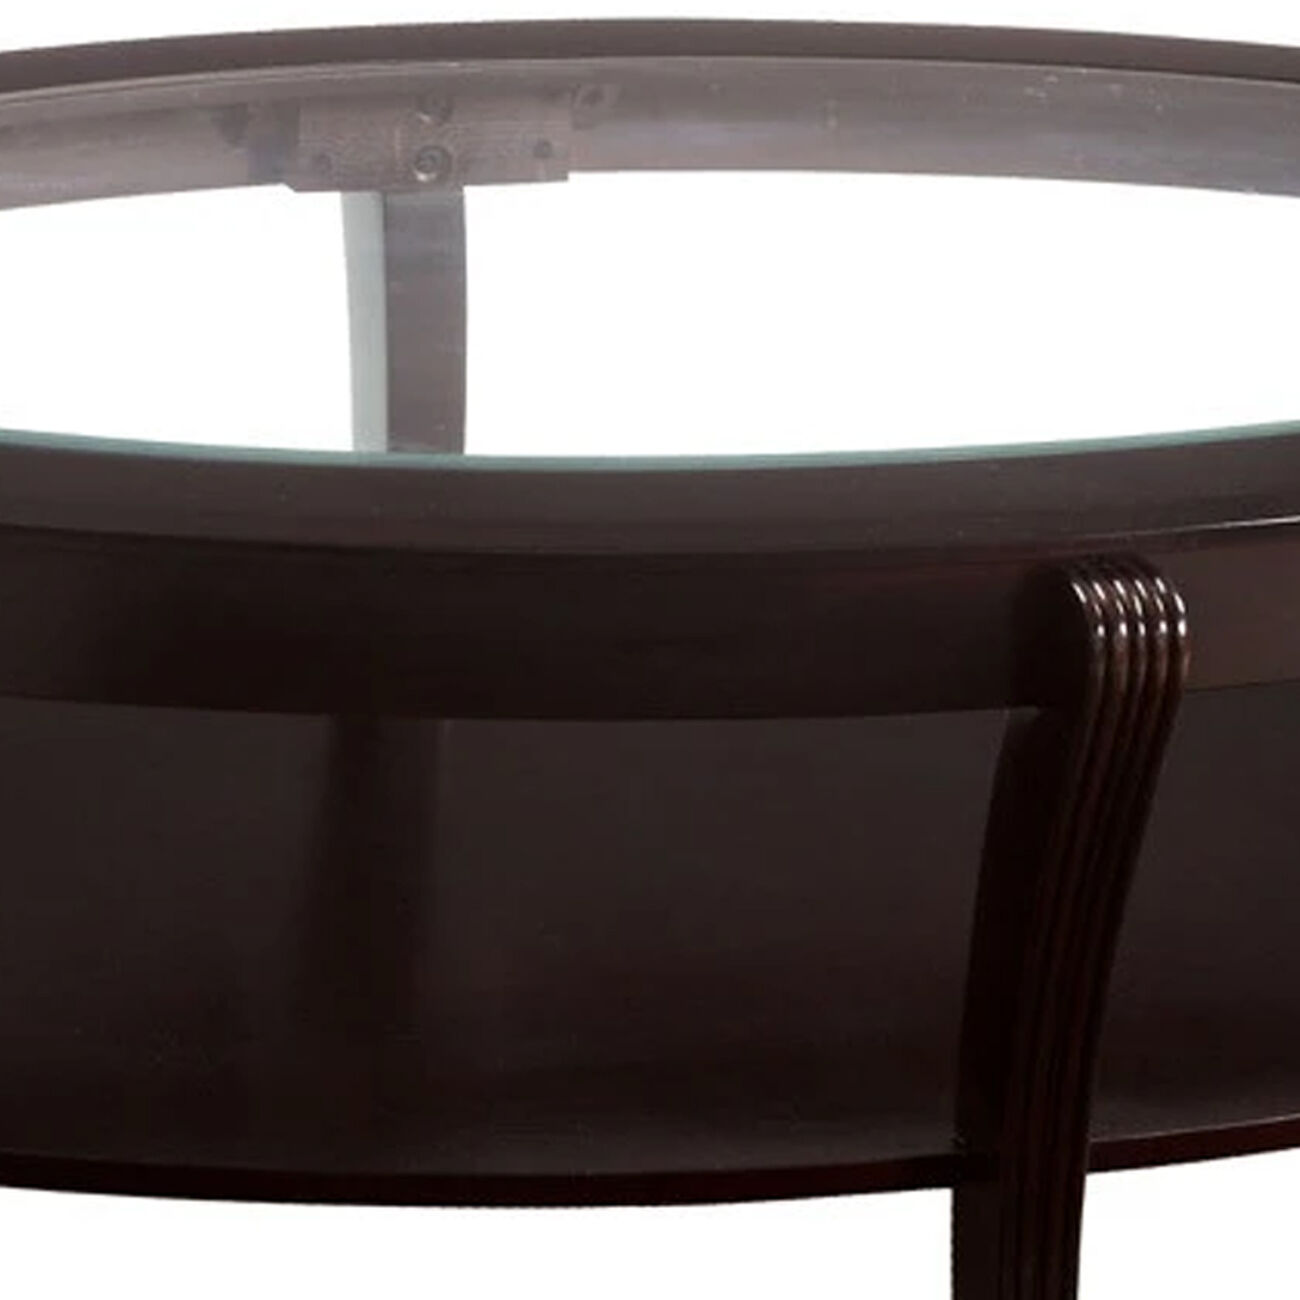 Oval Wooden Cocktail Table with Glass Insert and Open Shelf, Espresso Brown